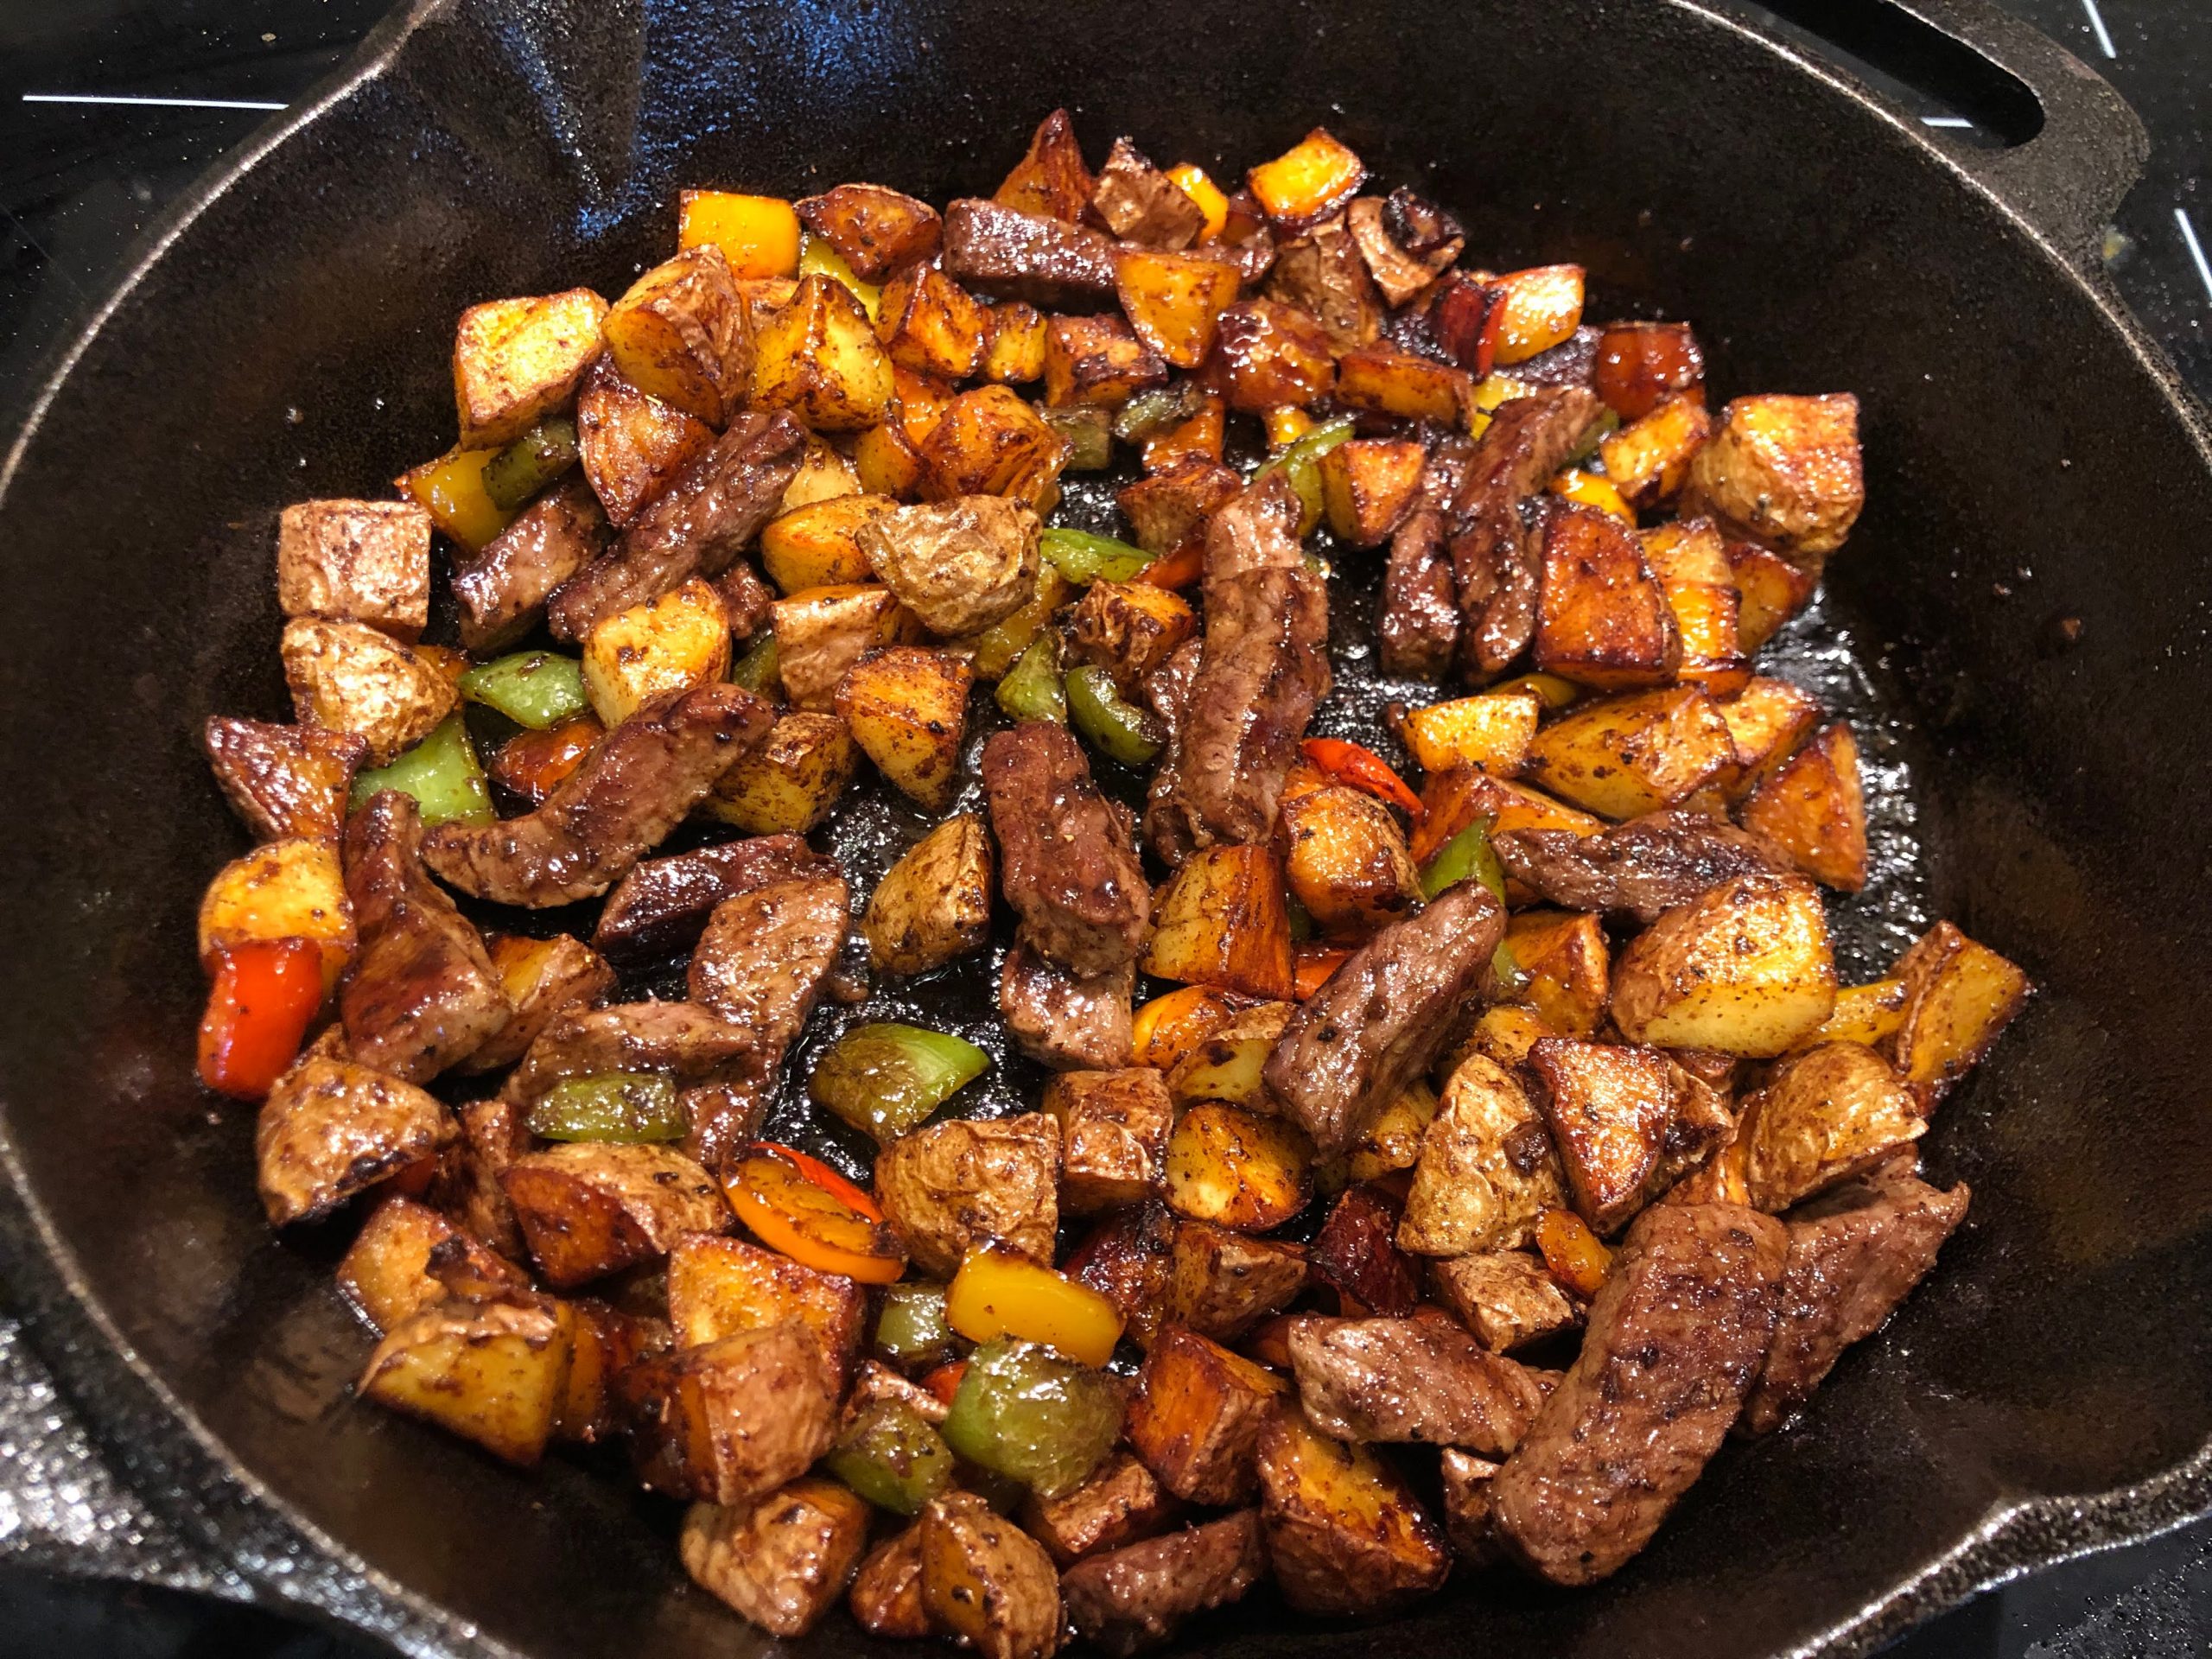 Customizable 15-Minute Balsamic-Glazed Sirloin with Potatoes and Bell Peppers